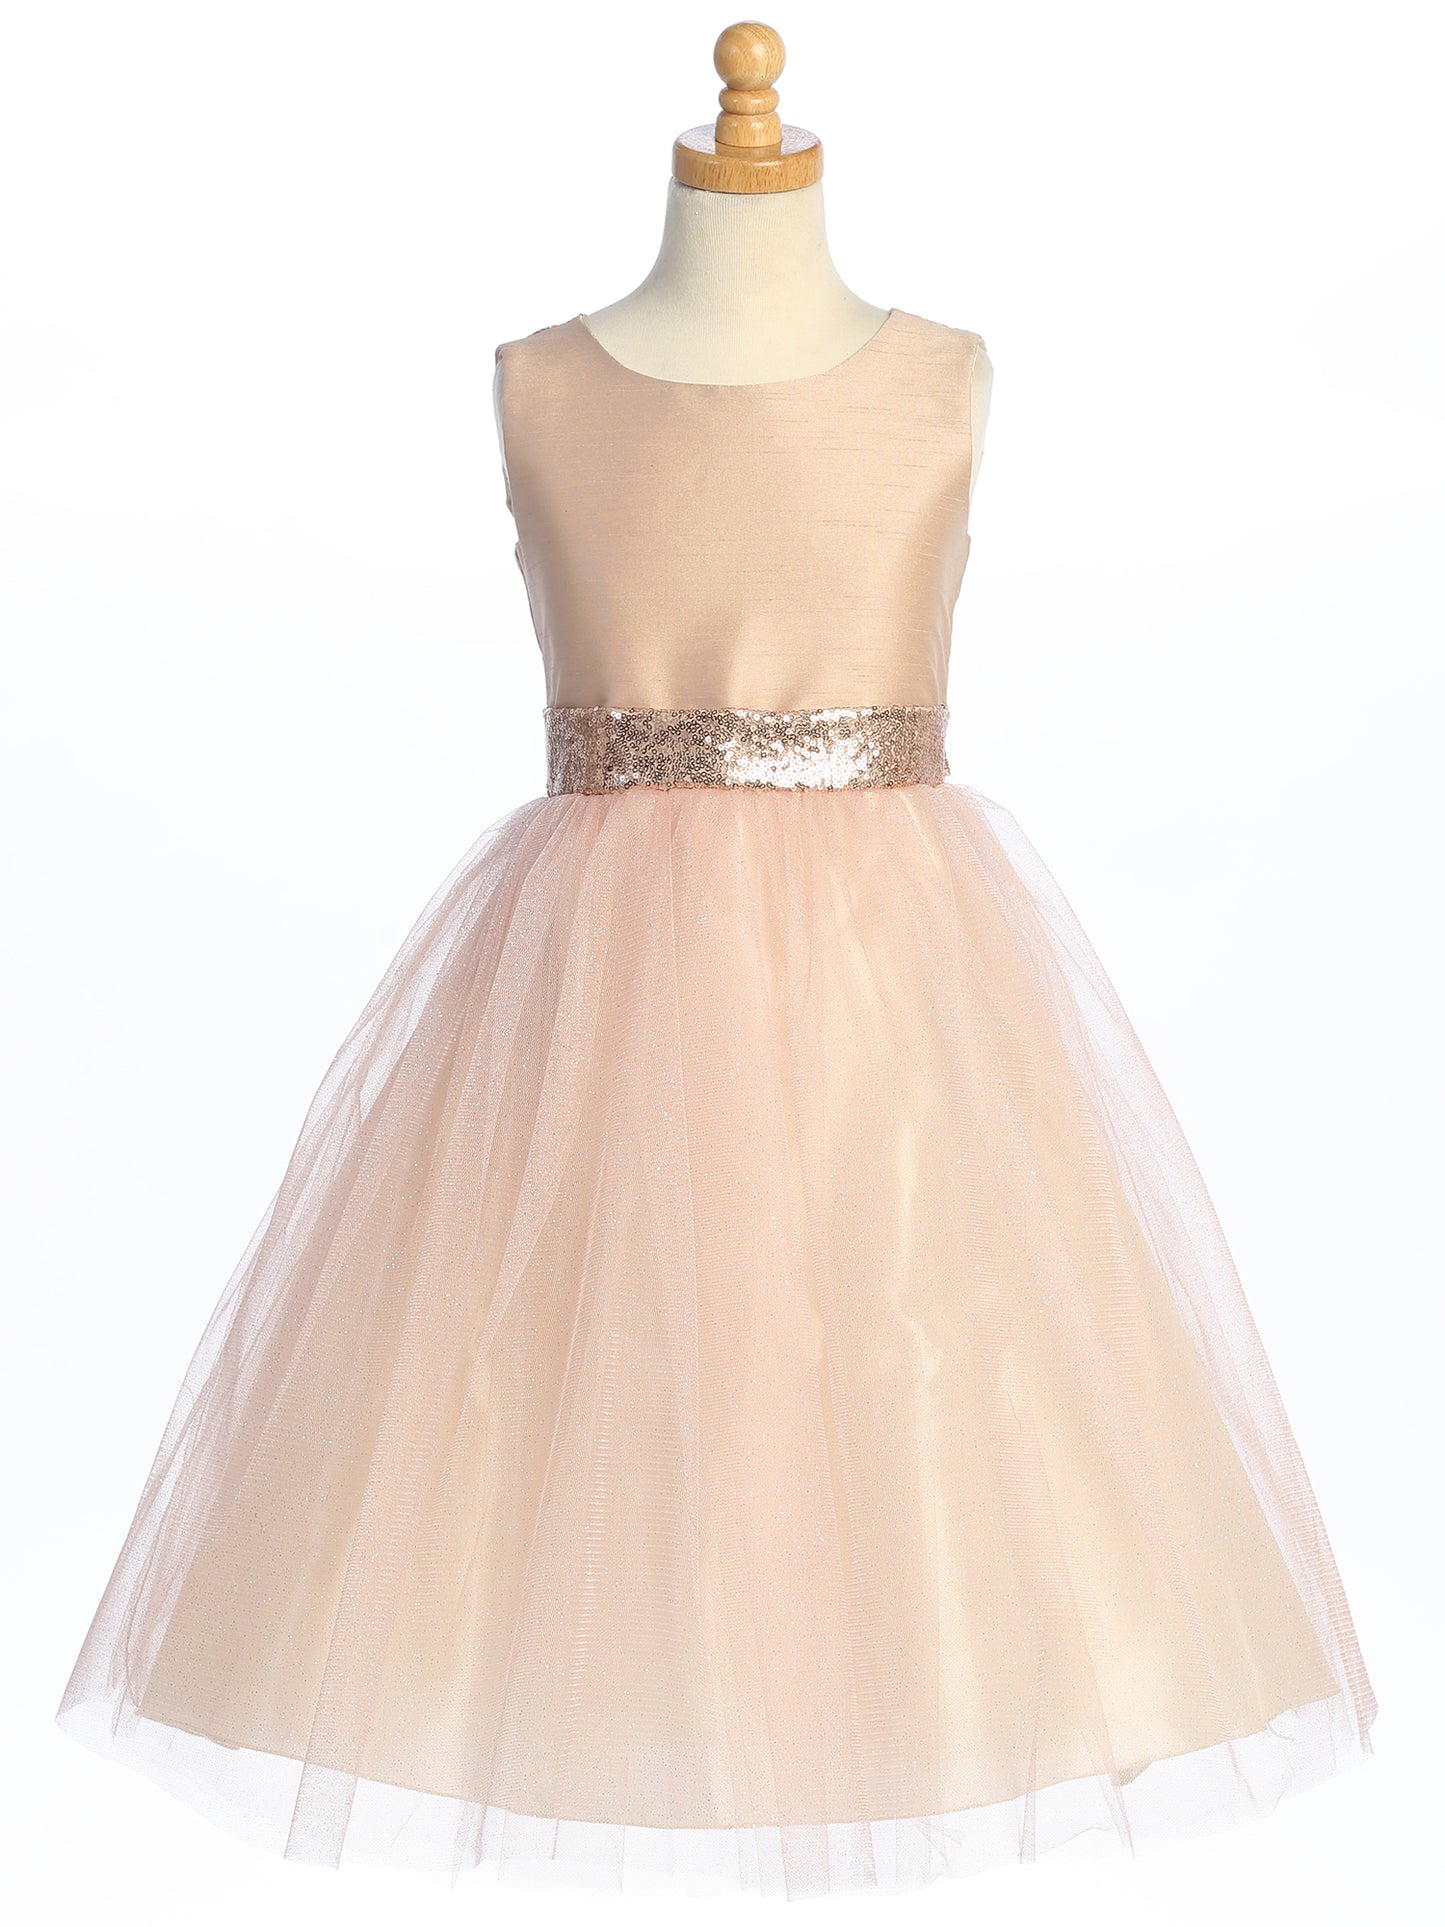 Blush Pink Shantung and Sparkle Tulle Dress with Sequin Sash - BL255-BLSH